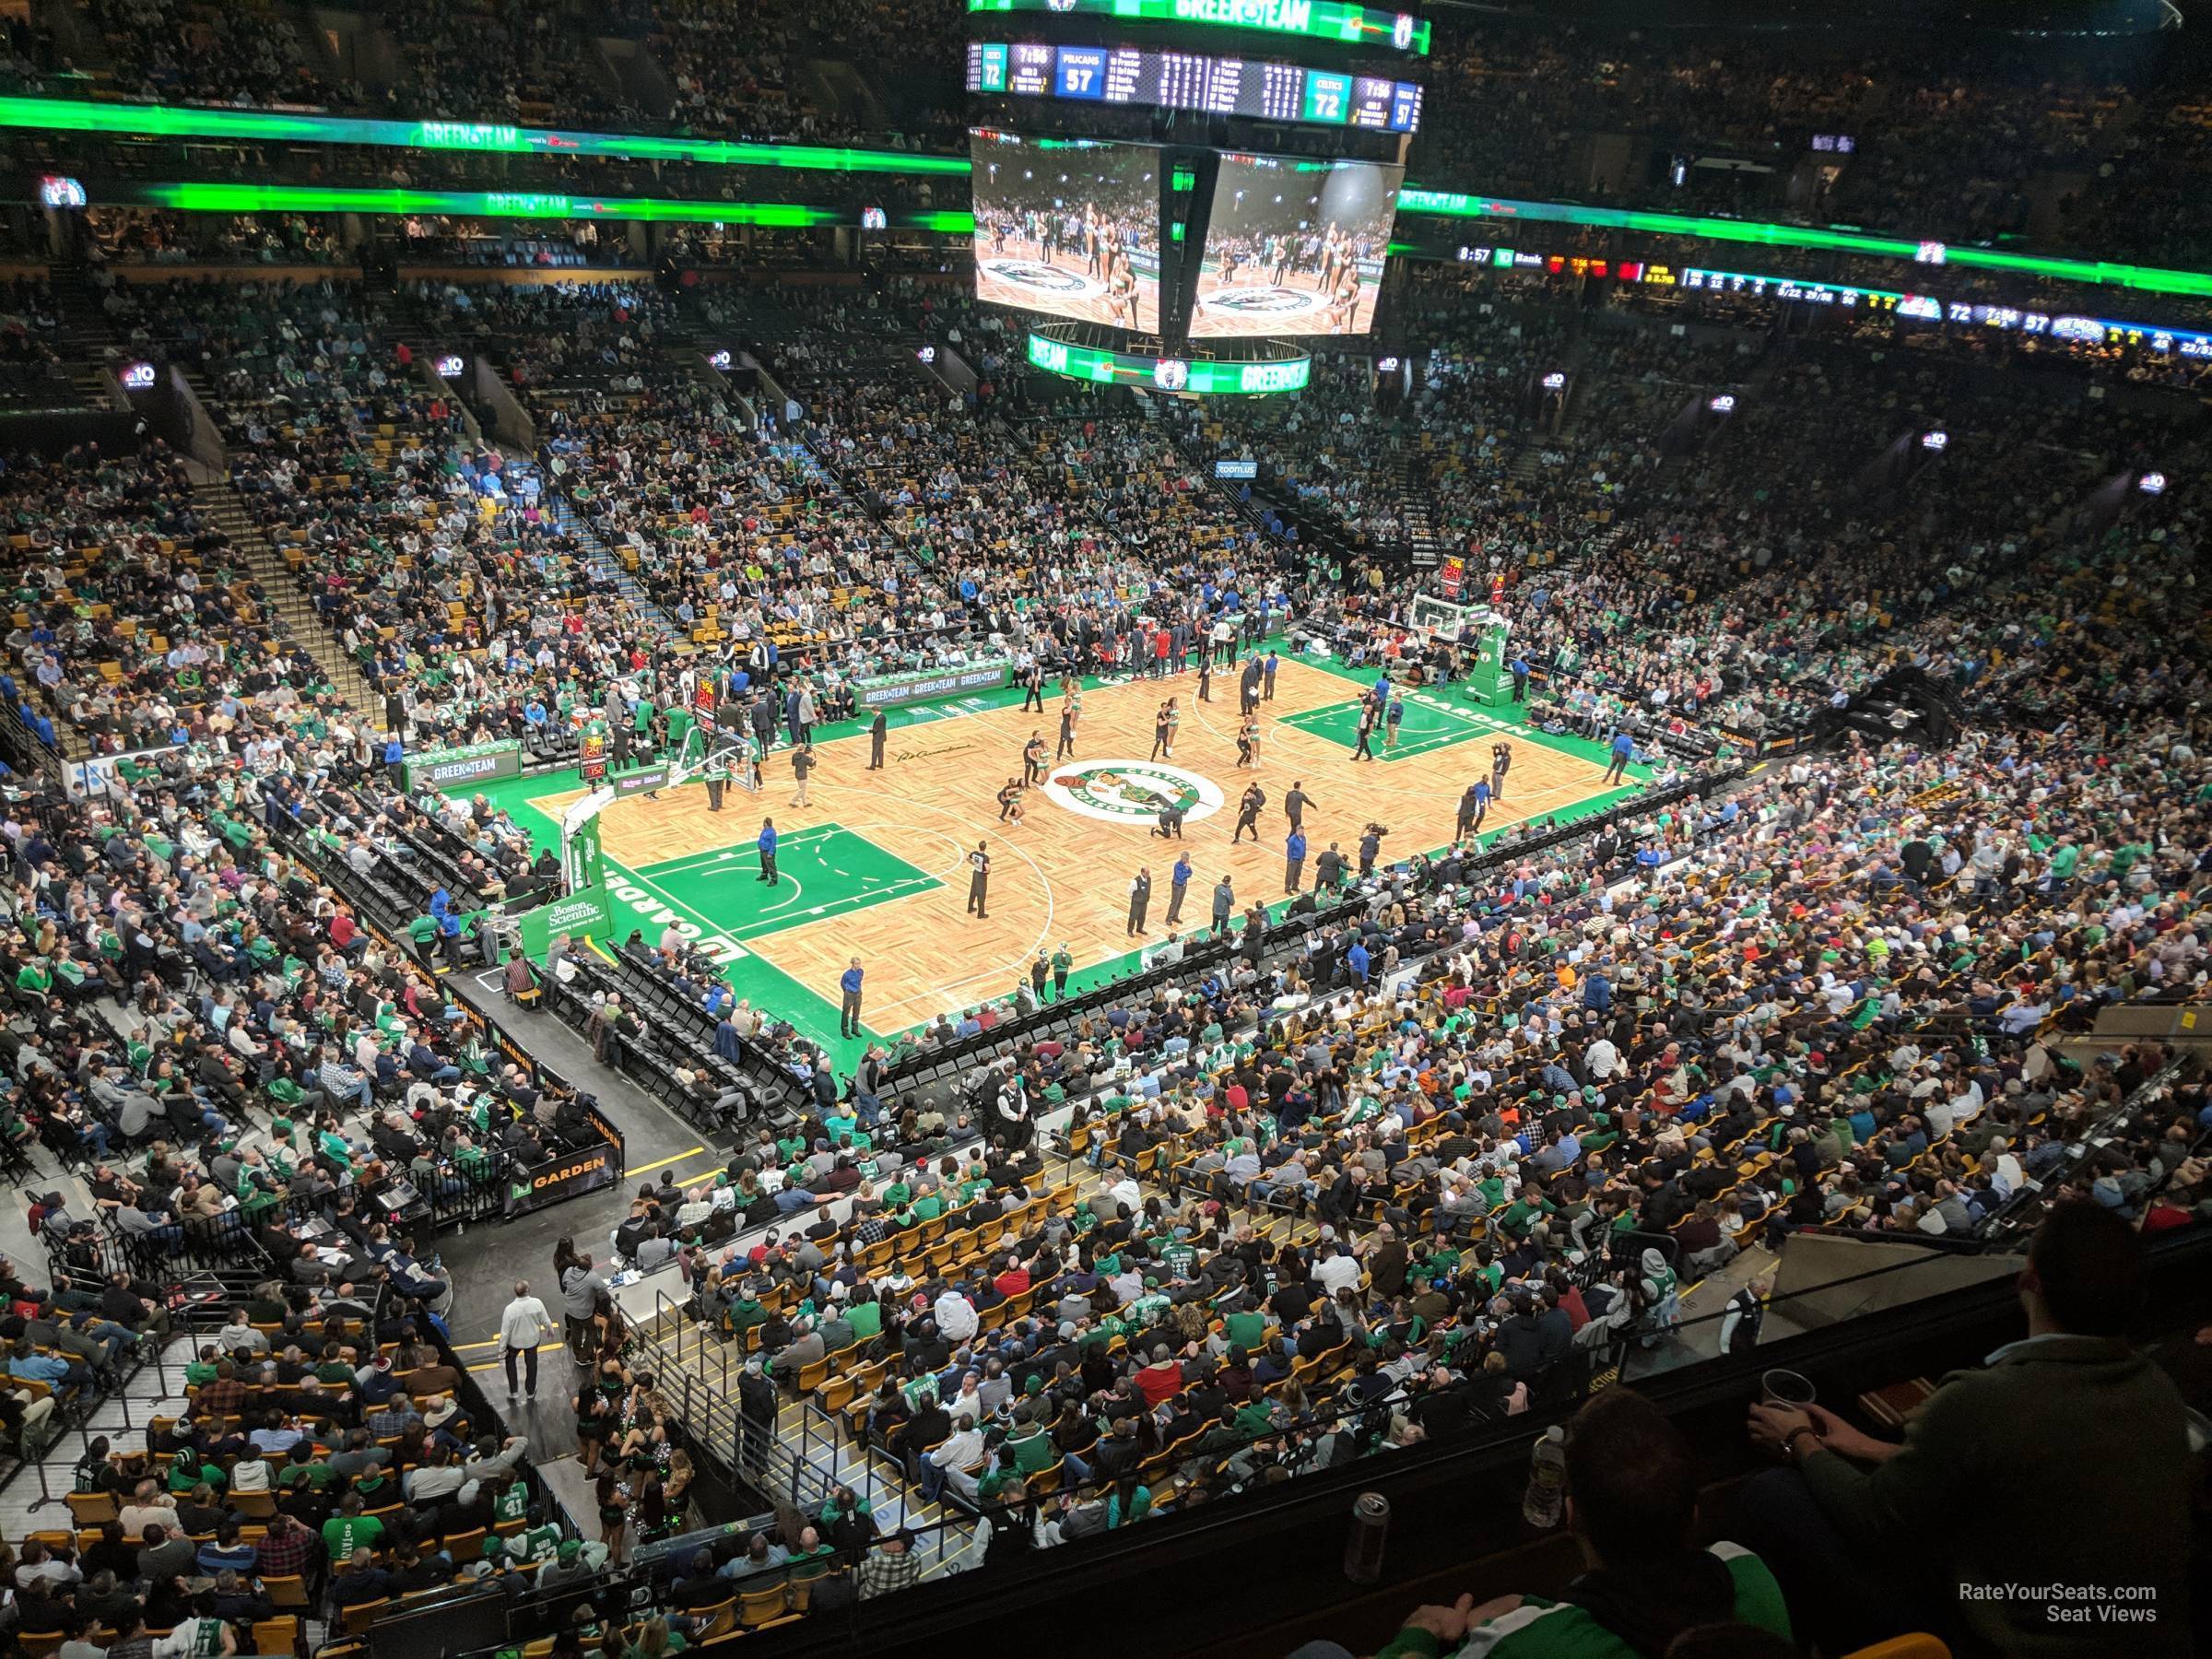 section 319, row 3 seat view  for basketball - td garden